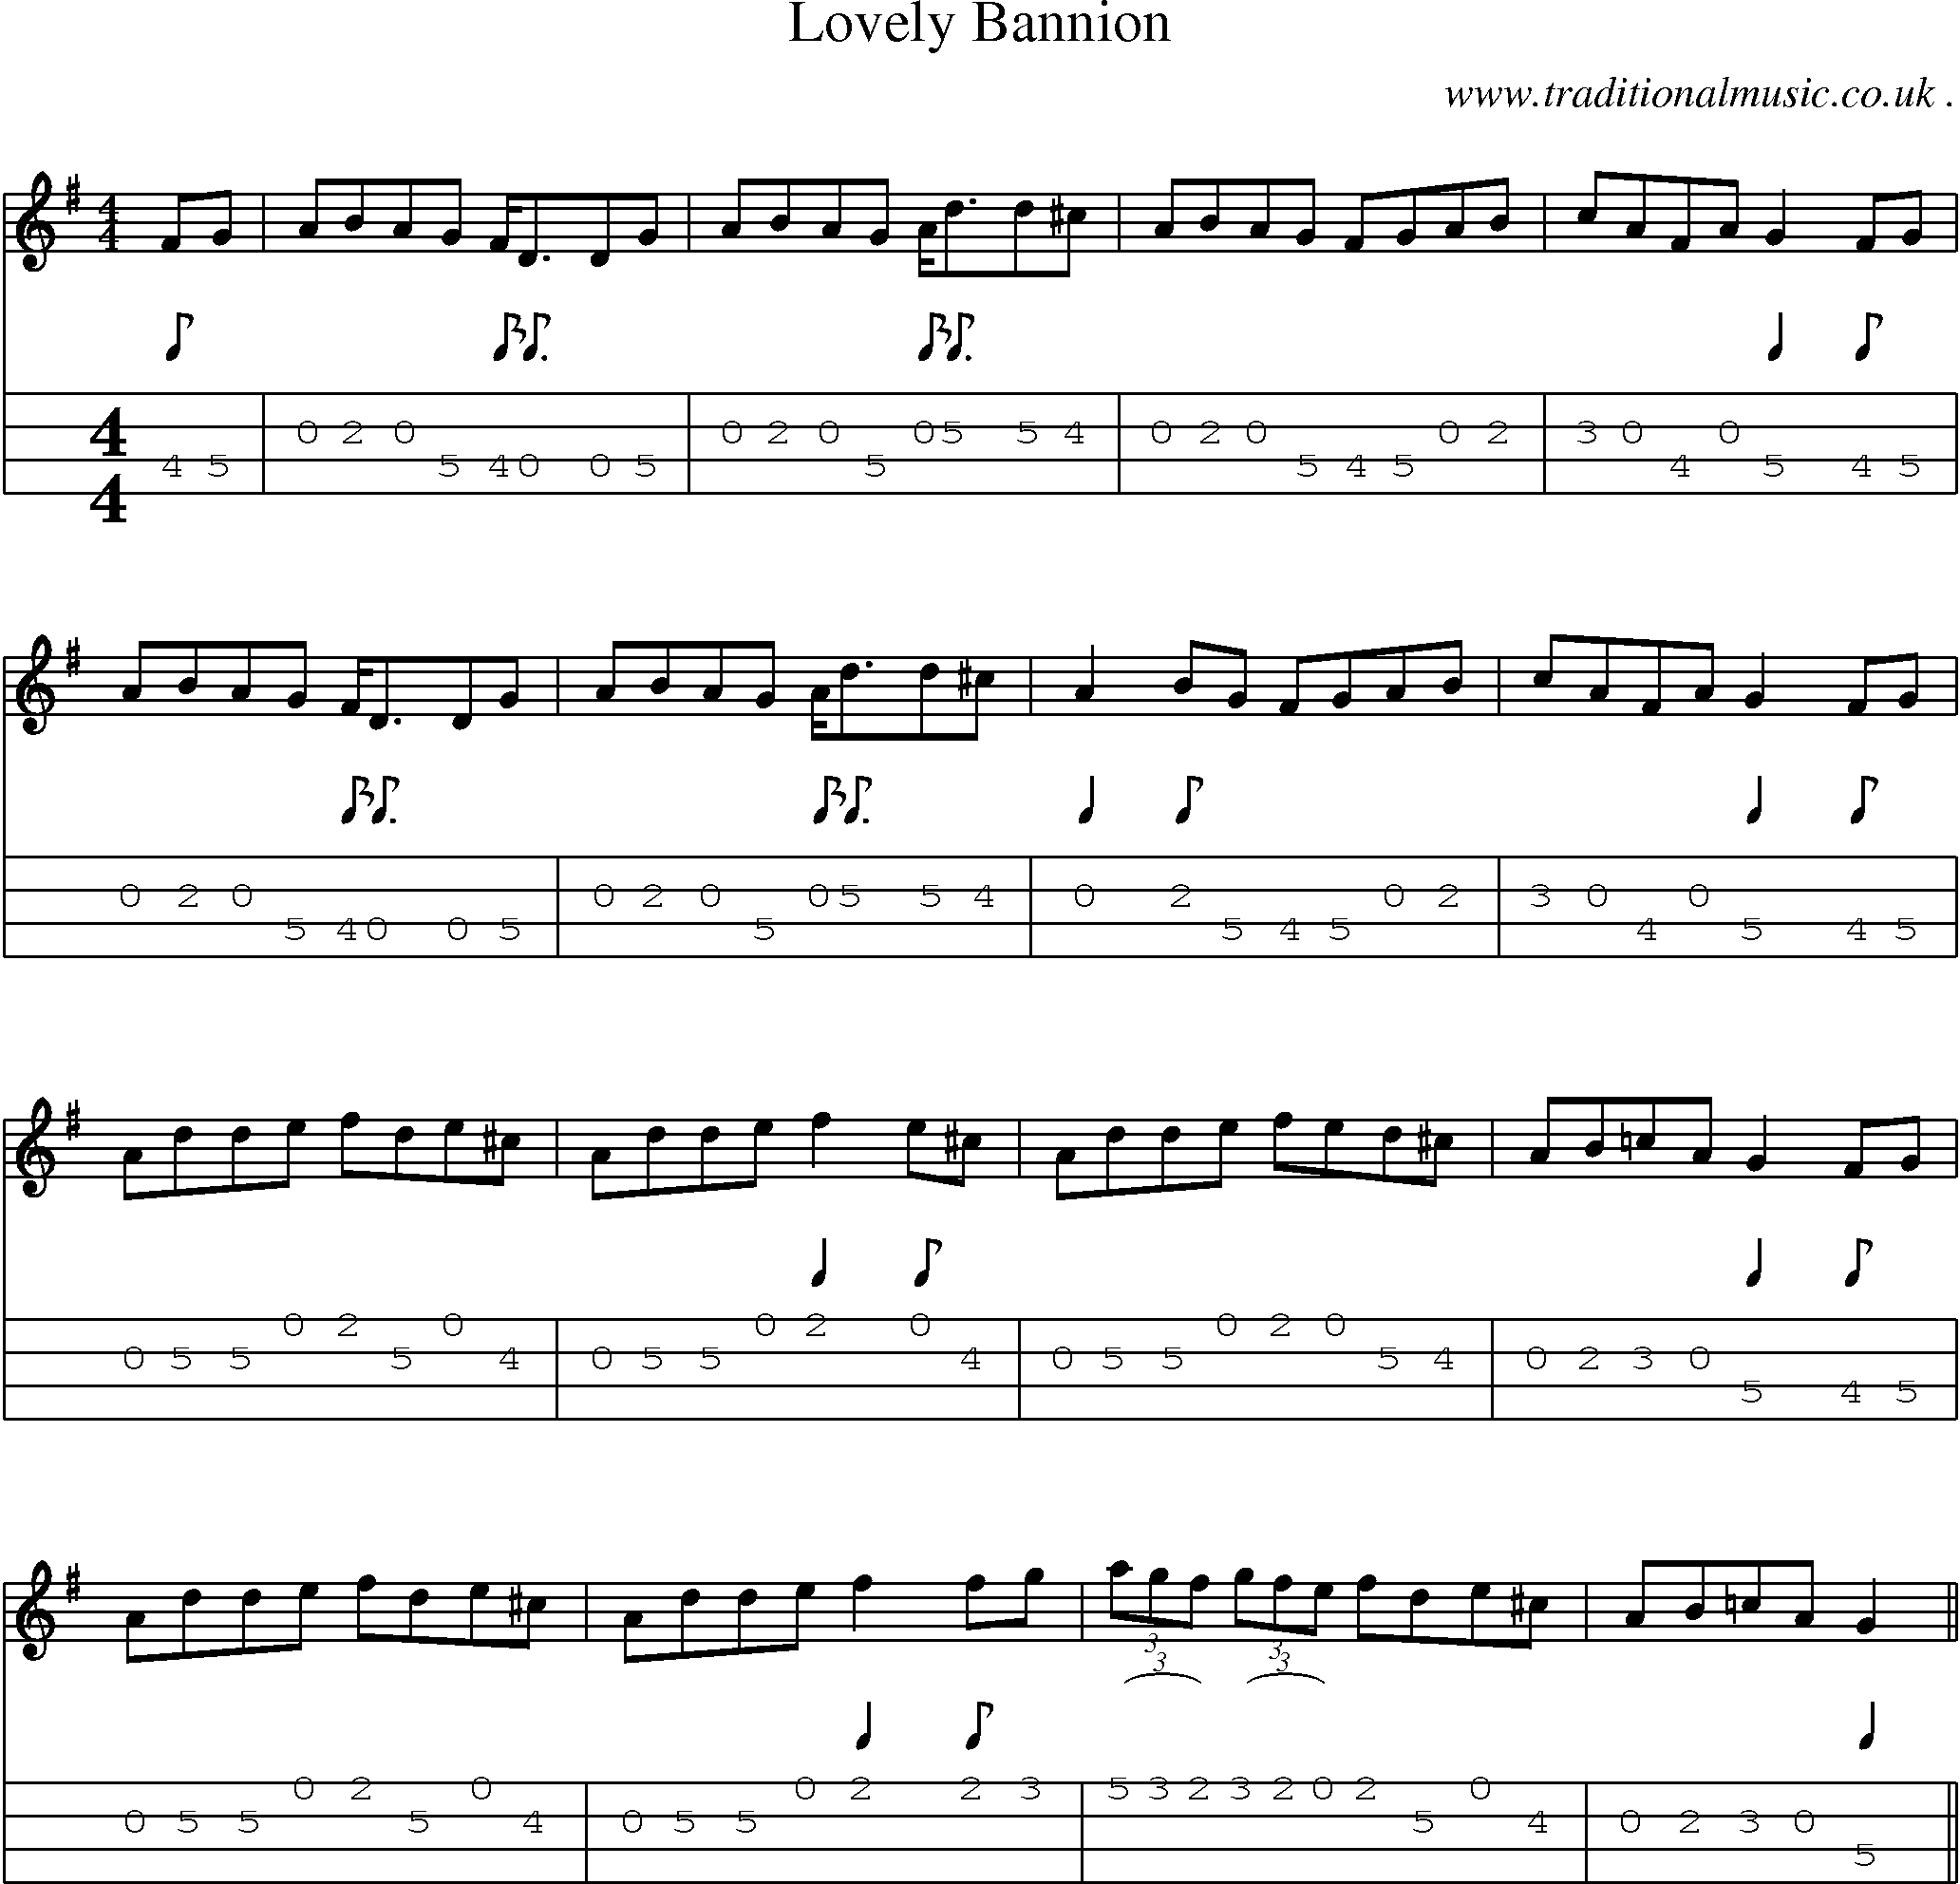 Sheet-Music and Mandolin Tabs for Lovely Bannion